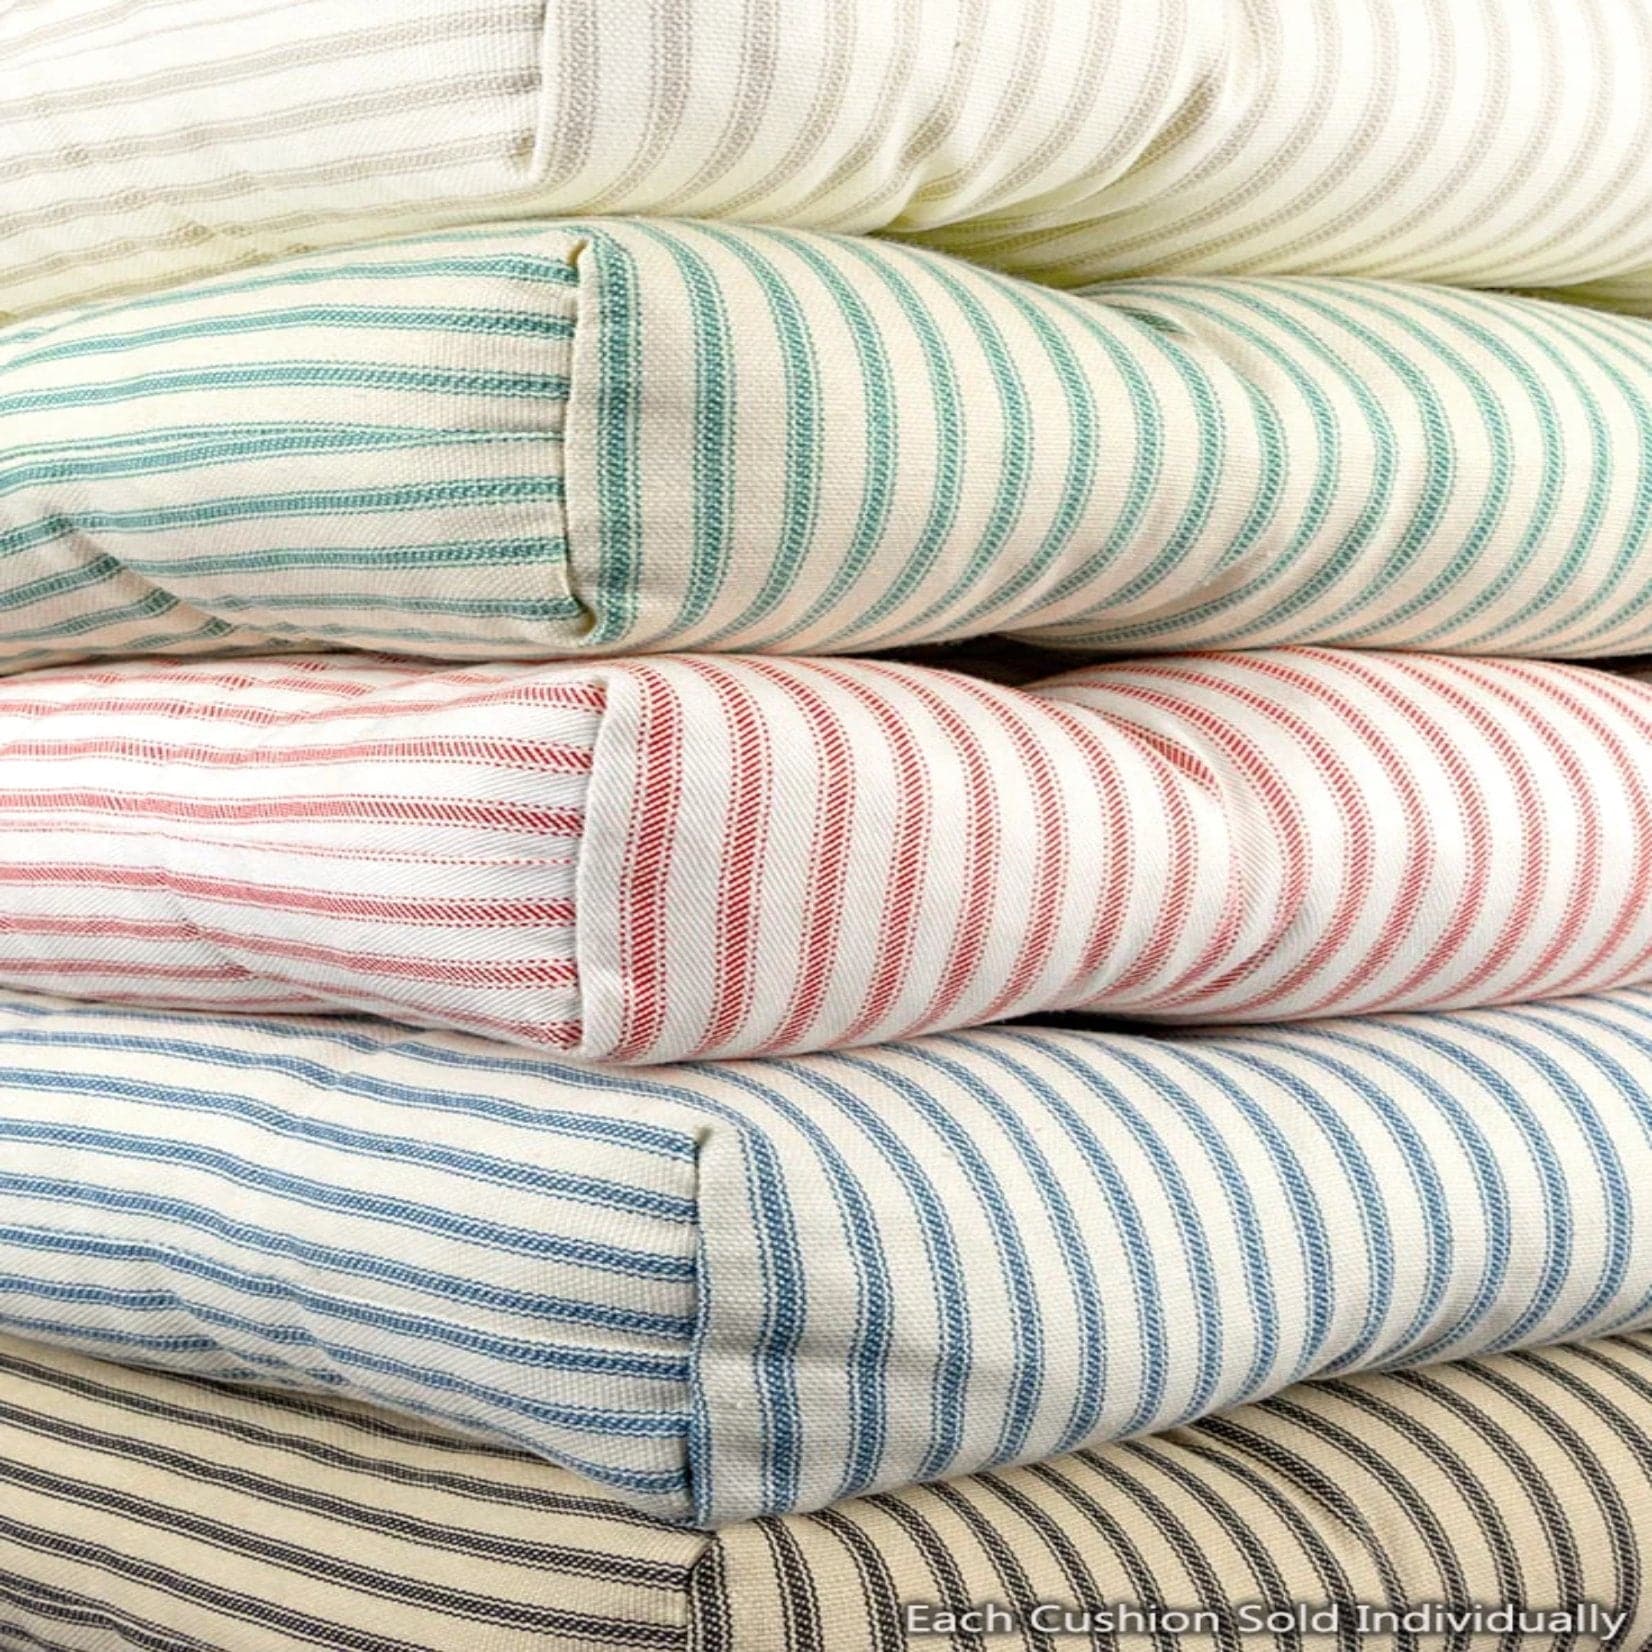 Assorted Colors of Ticking Stripe Chair Cushions - Barnett Home Decor 